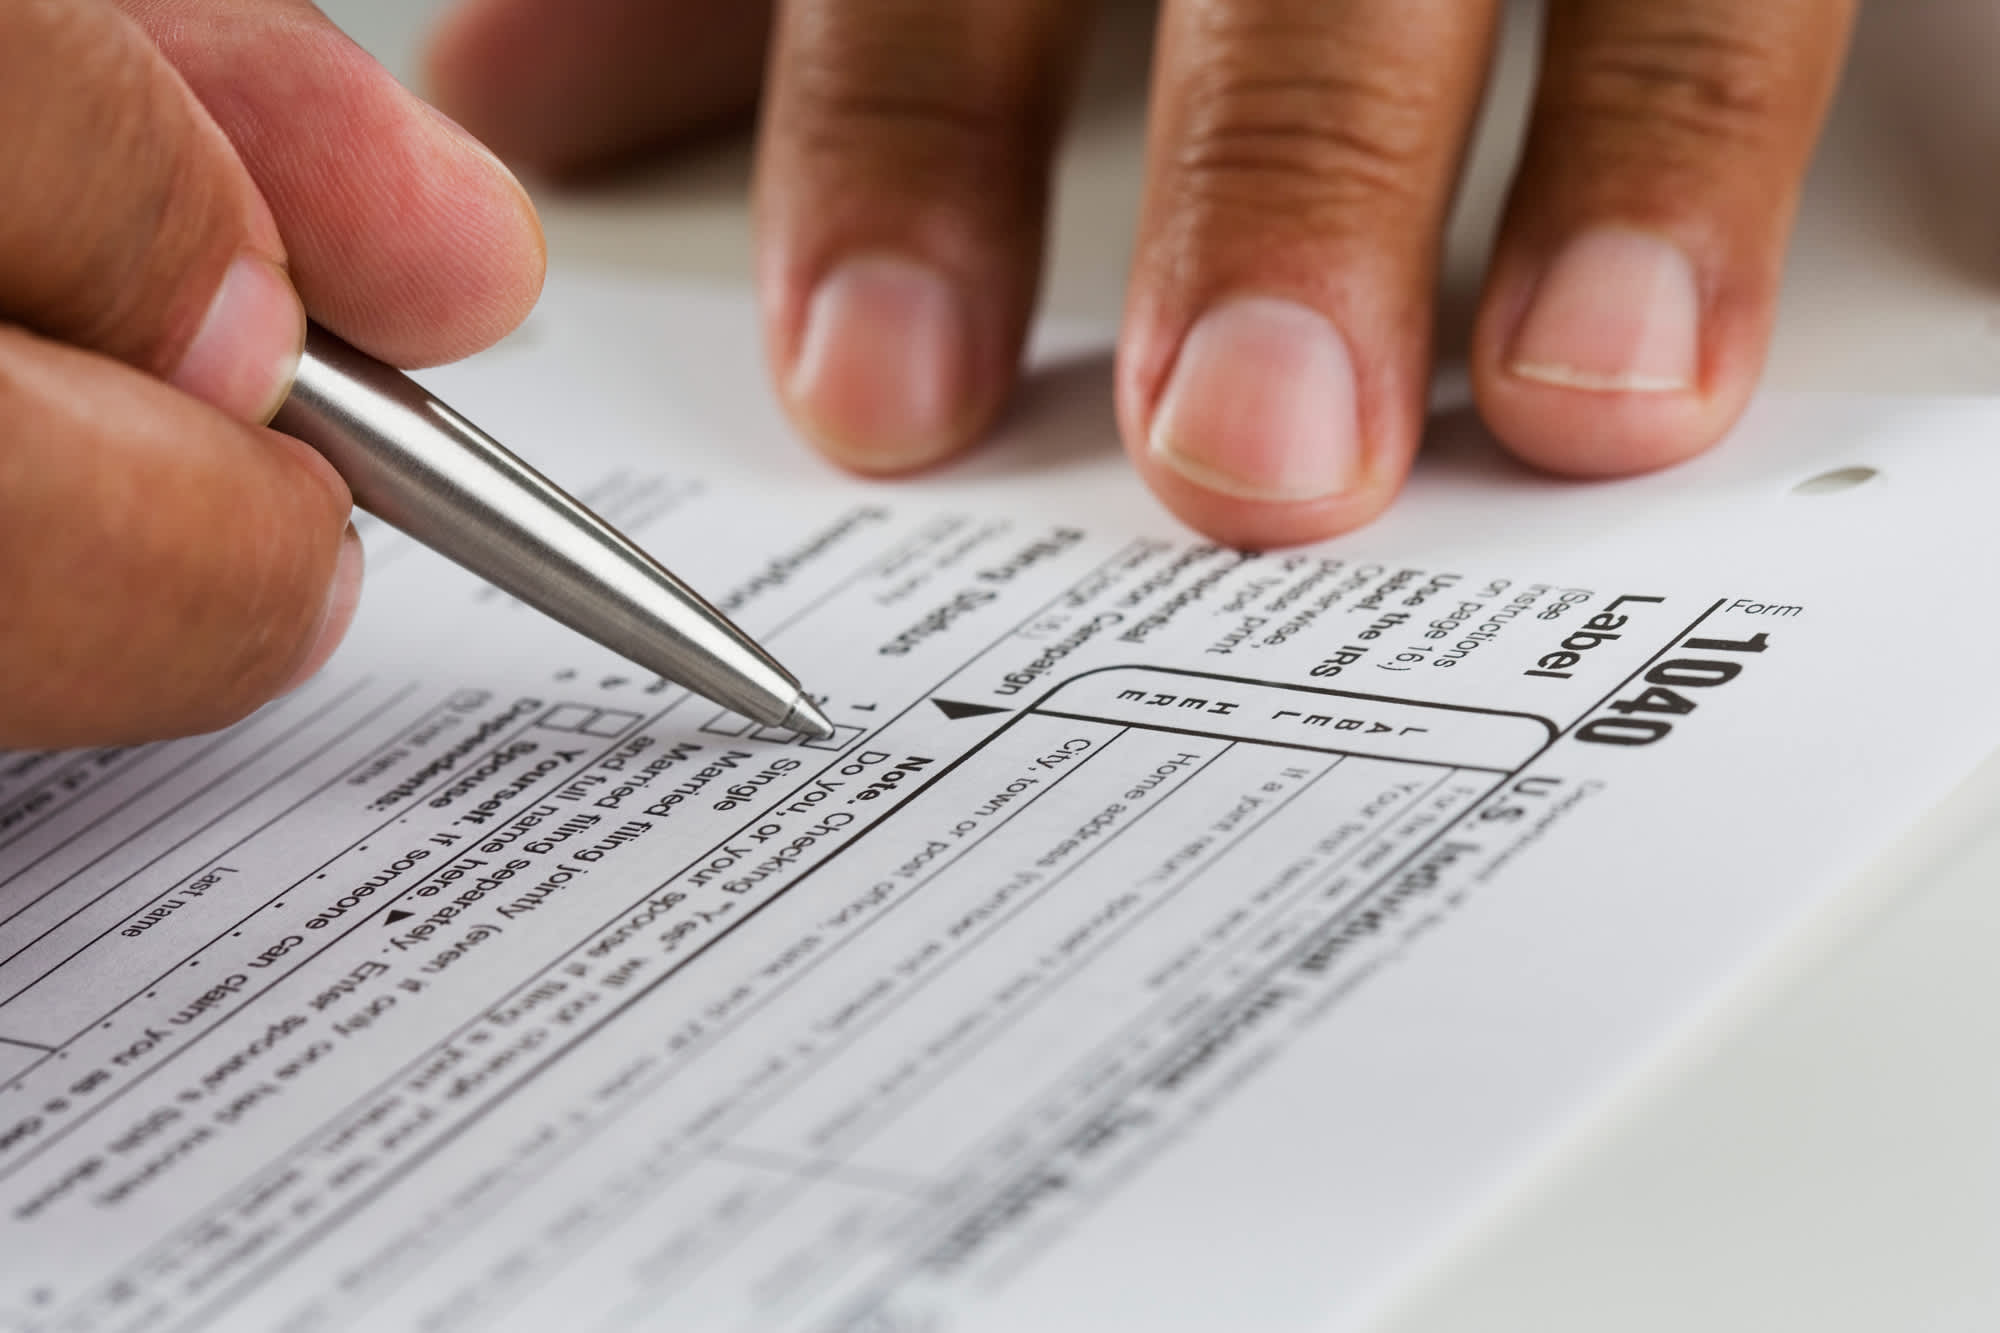 Some unemployed workers may require an amended tax return, IRS says